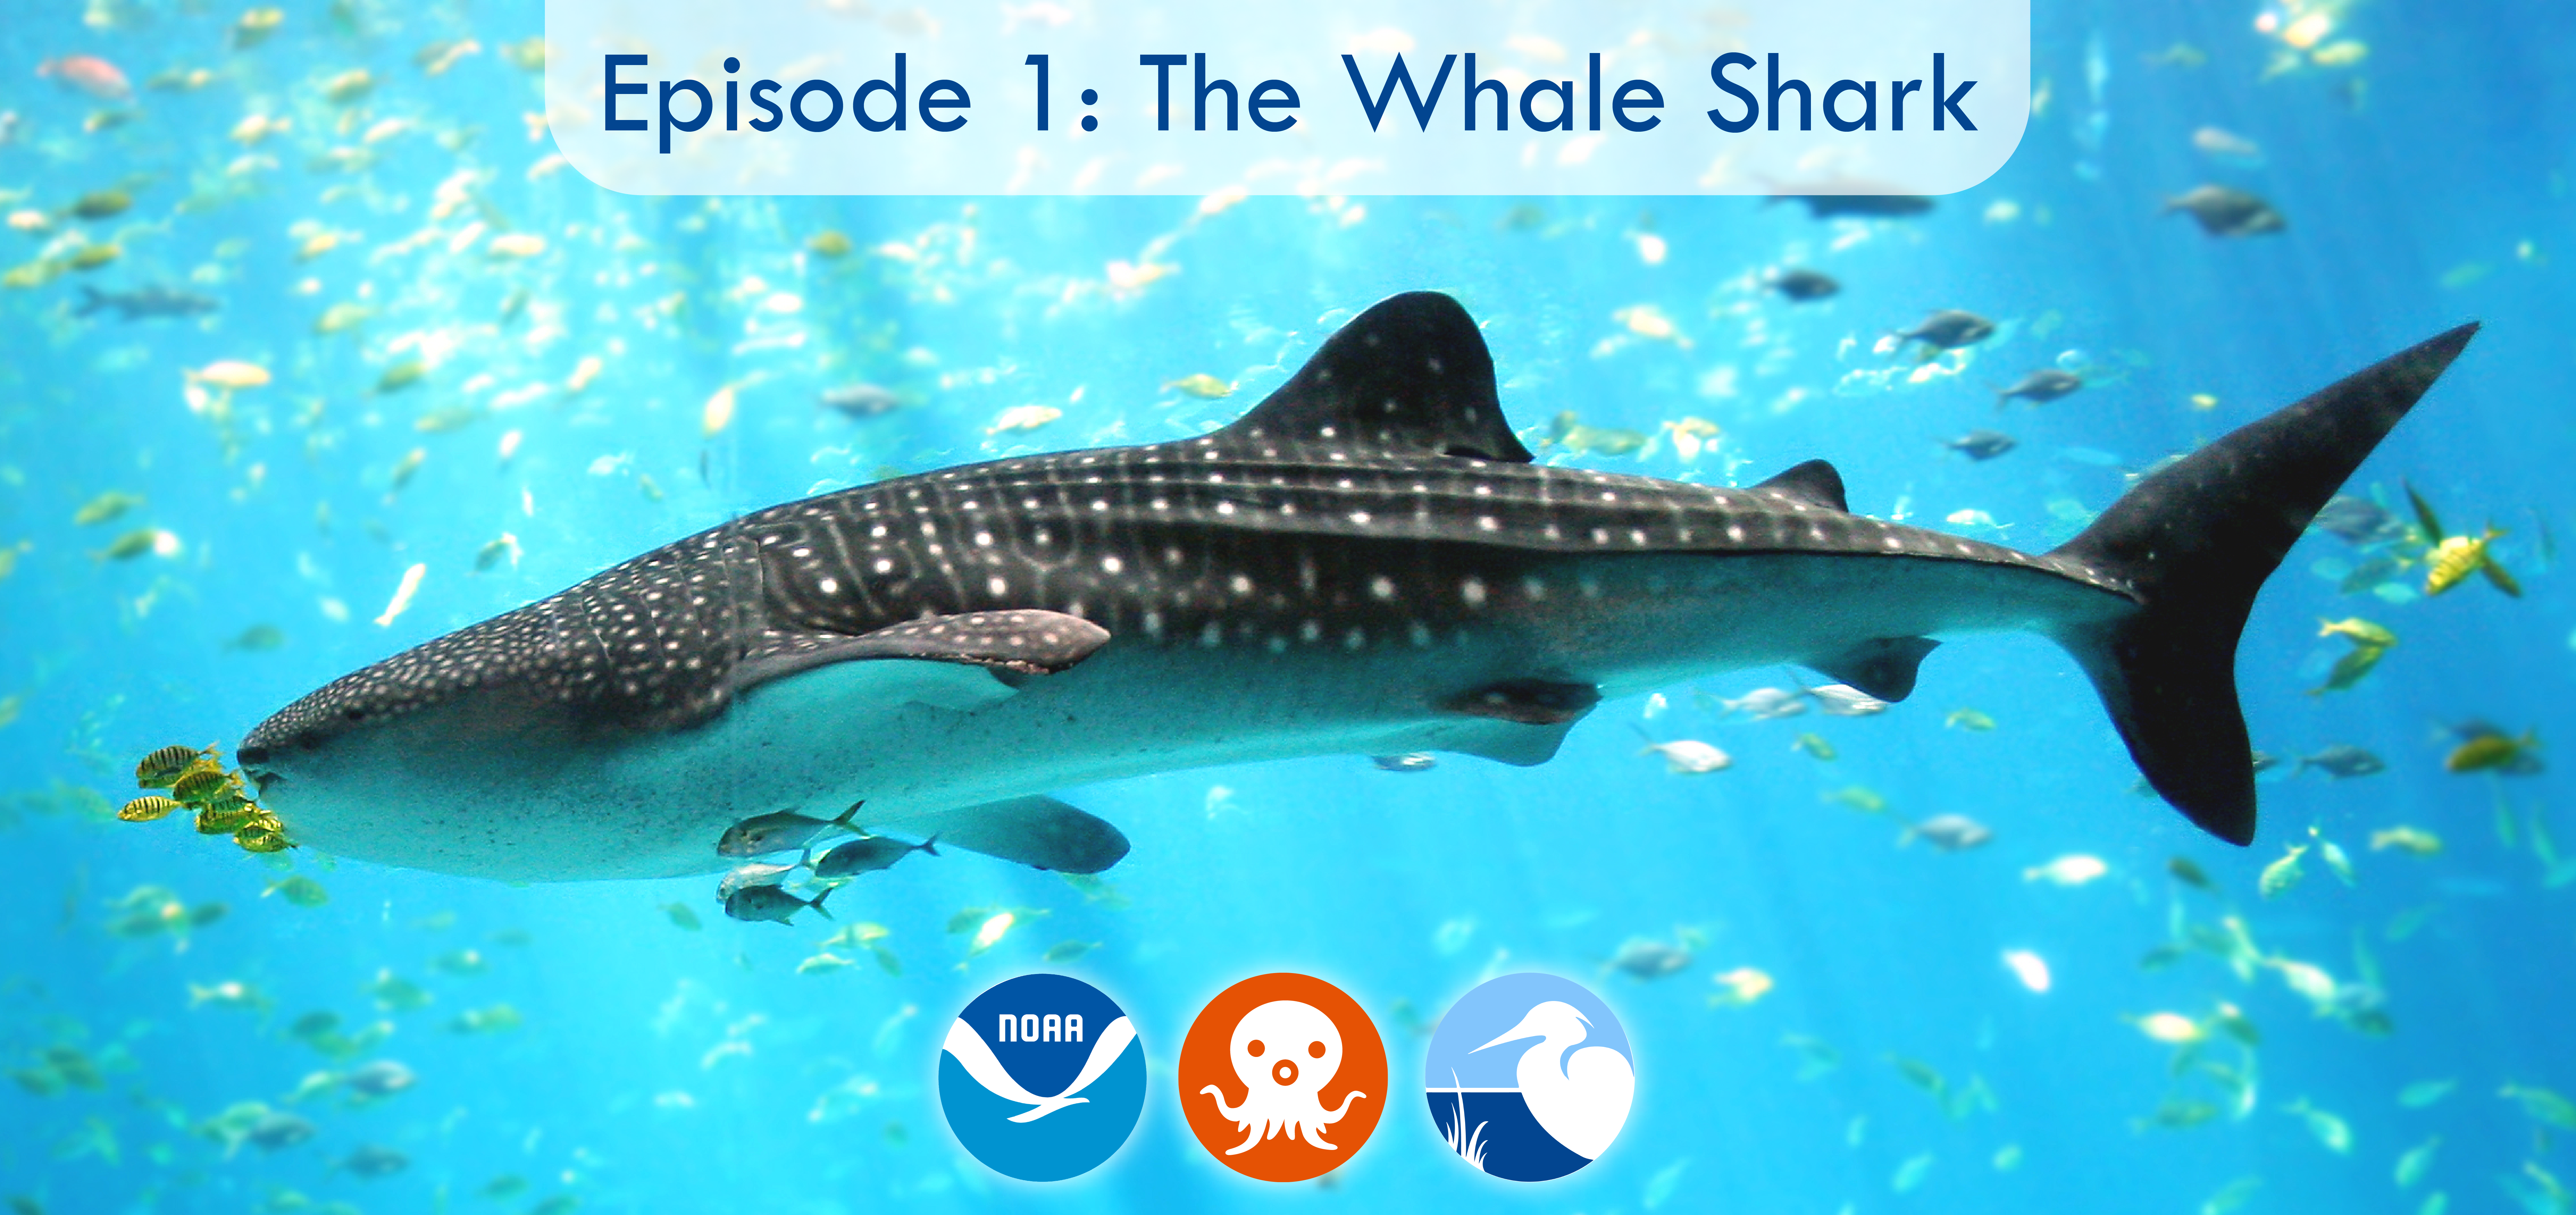 A whale shark swims amongst yellow fish. The banner says "Episode 1: The Whale Shark" and has the NOAA logo, the Octonauts logo, and the Coastal Ecosystem Learning Center (CELC) network logo.